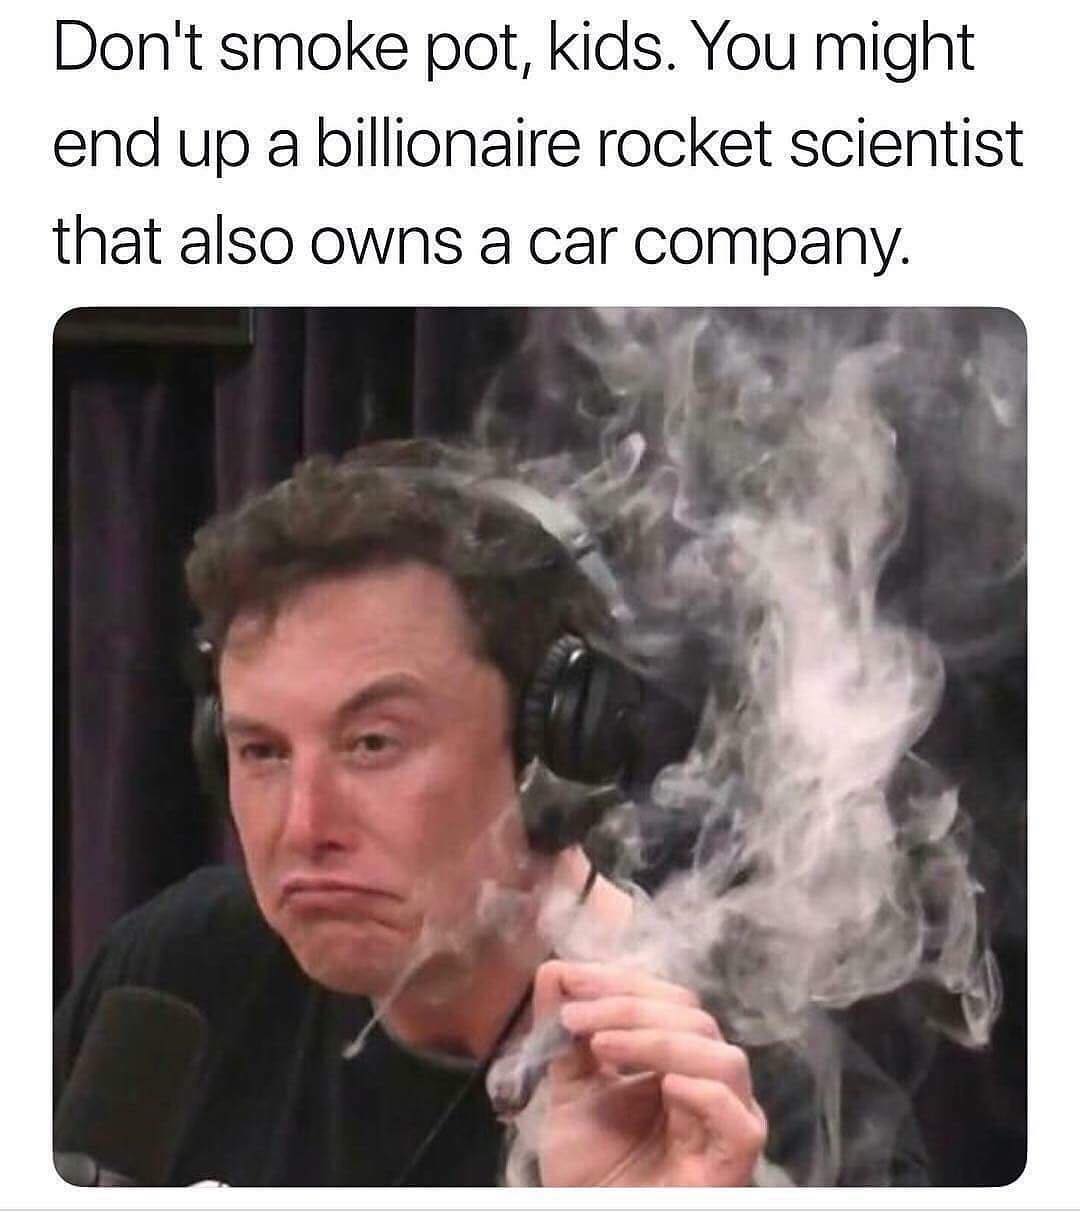 Don't smoke pot, kids. You might end up a billionaire rocket scientist that also owns a car company.